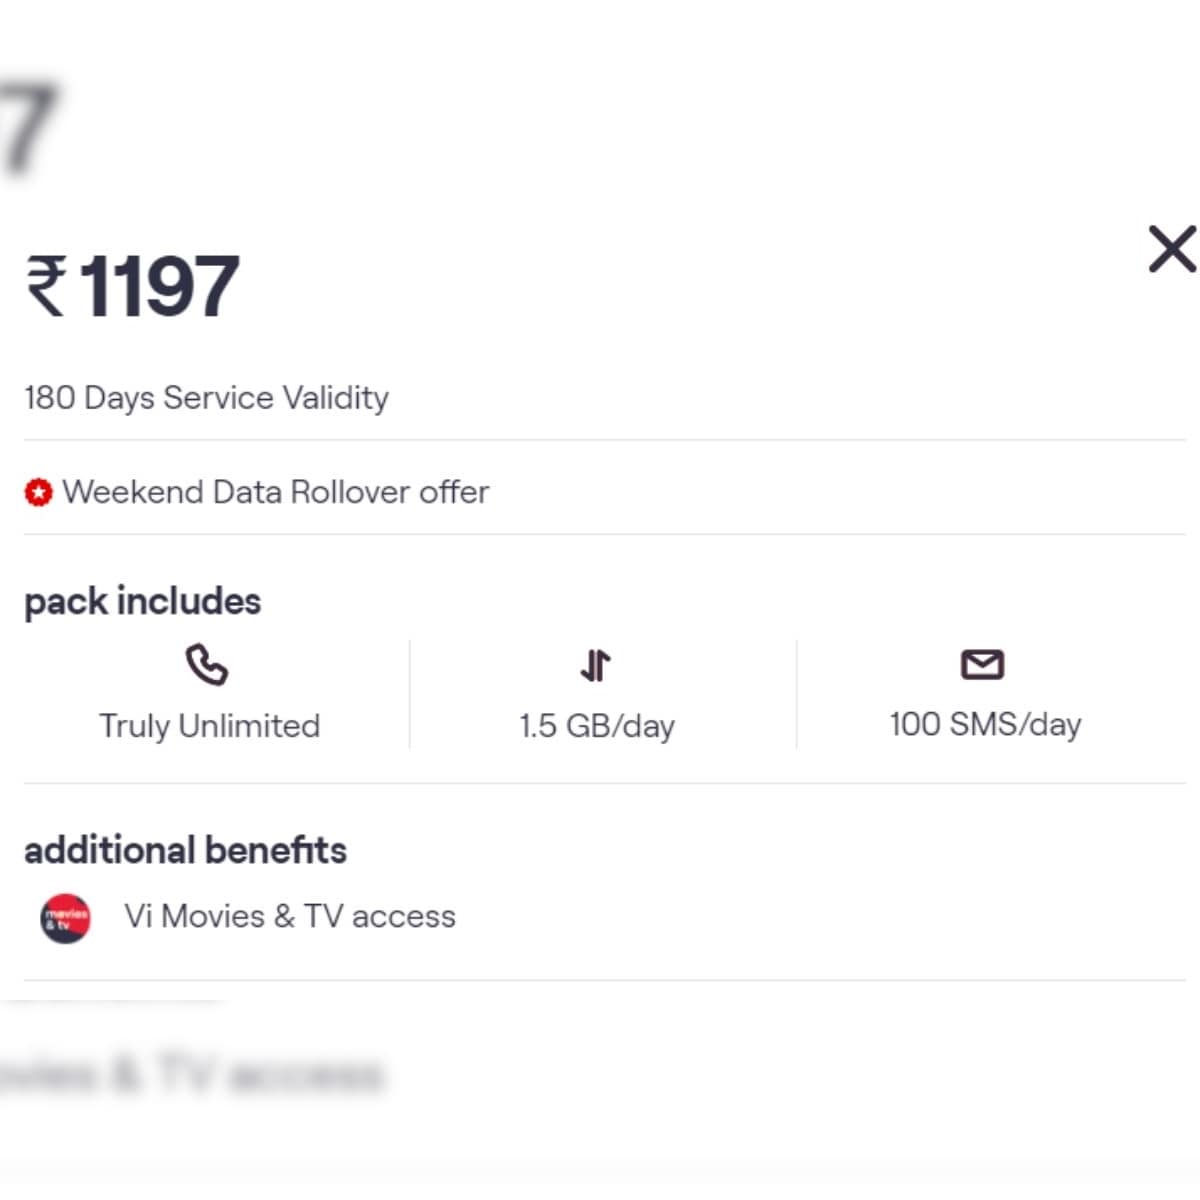 Vodafone Idea Rs 1,197 Prepaid Plan With 180 Days Validity Now ...